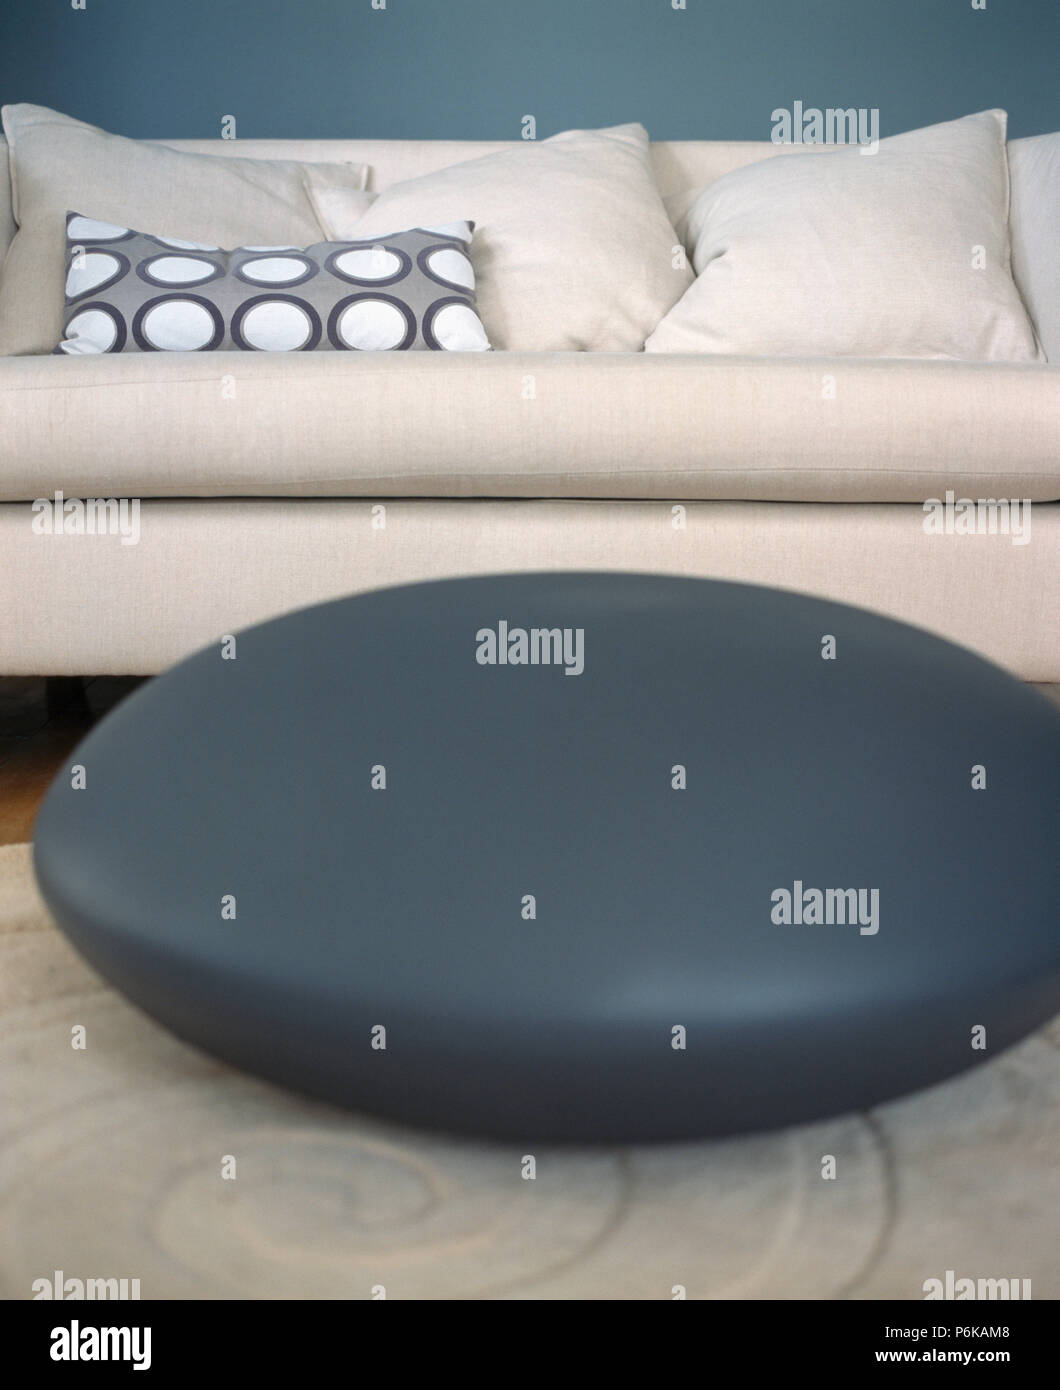 https://c8.alamy.com/comp/P6KAM8/close-up-of-circular-dark-grey-leather-cushion-in-front-of-cream-sofa-with-matching-cushions-P6KAM8.jpg